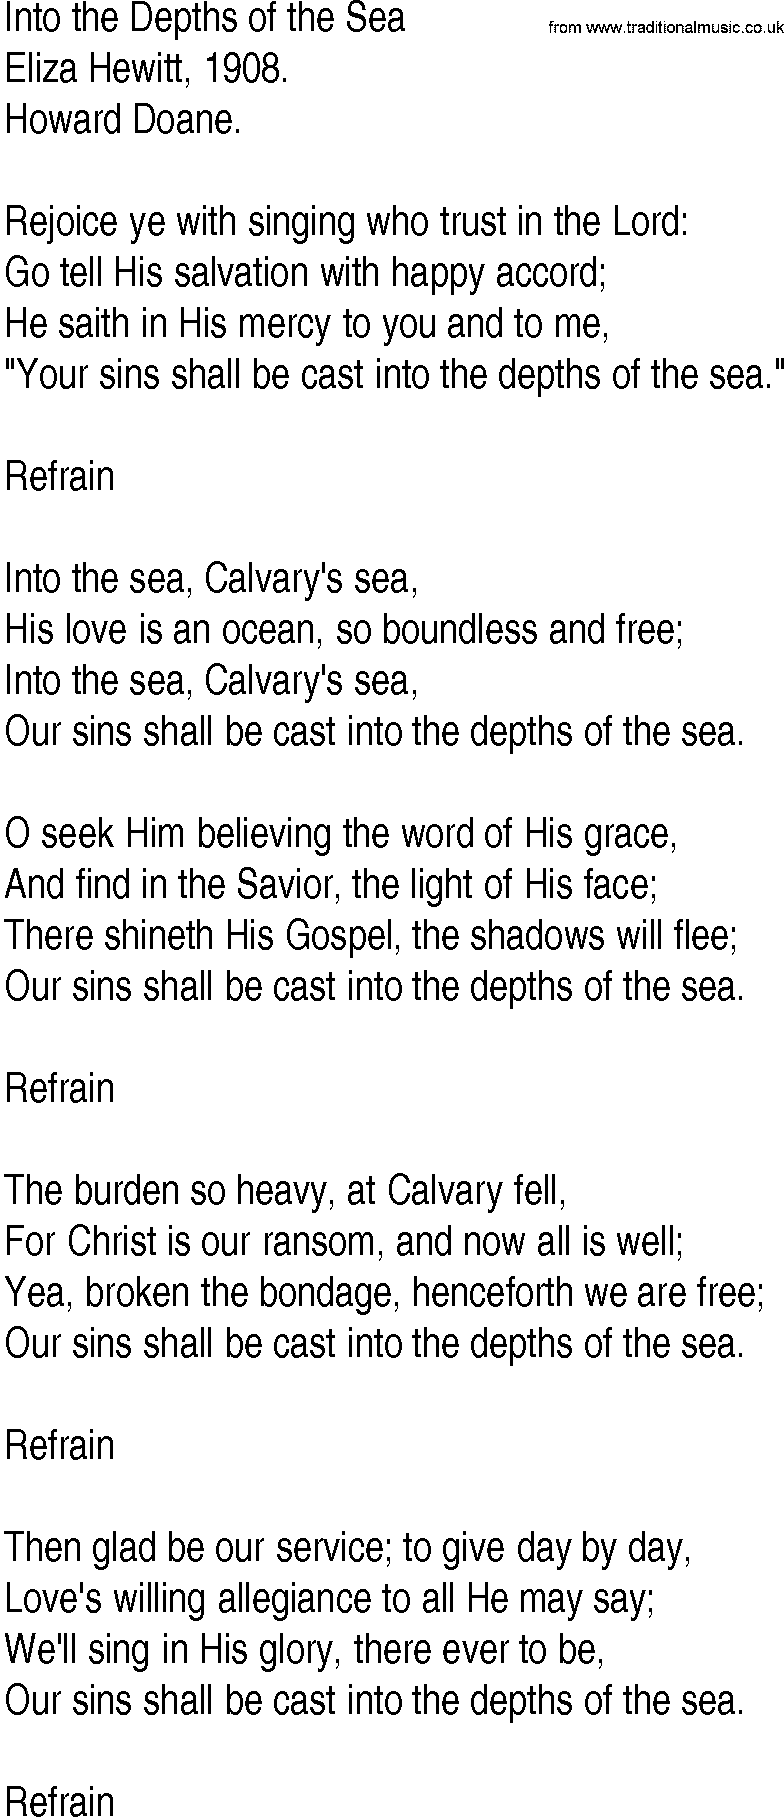 Hymn and Gospel Song: Into the Depths of the Sea by Eliza Hewitt lyrics